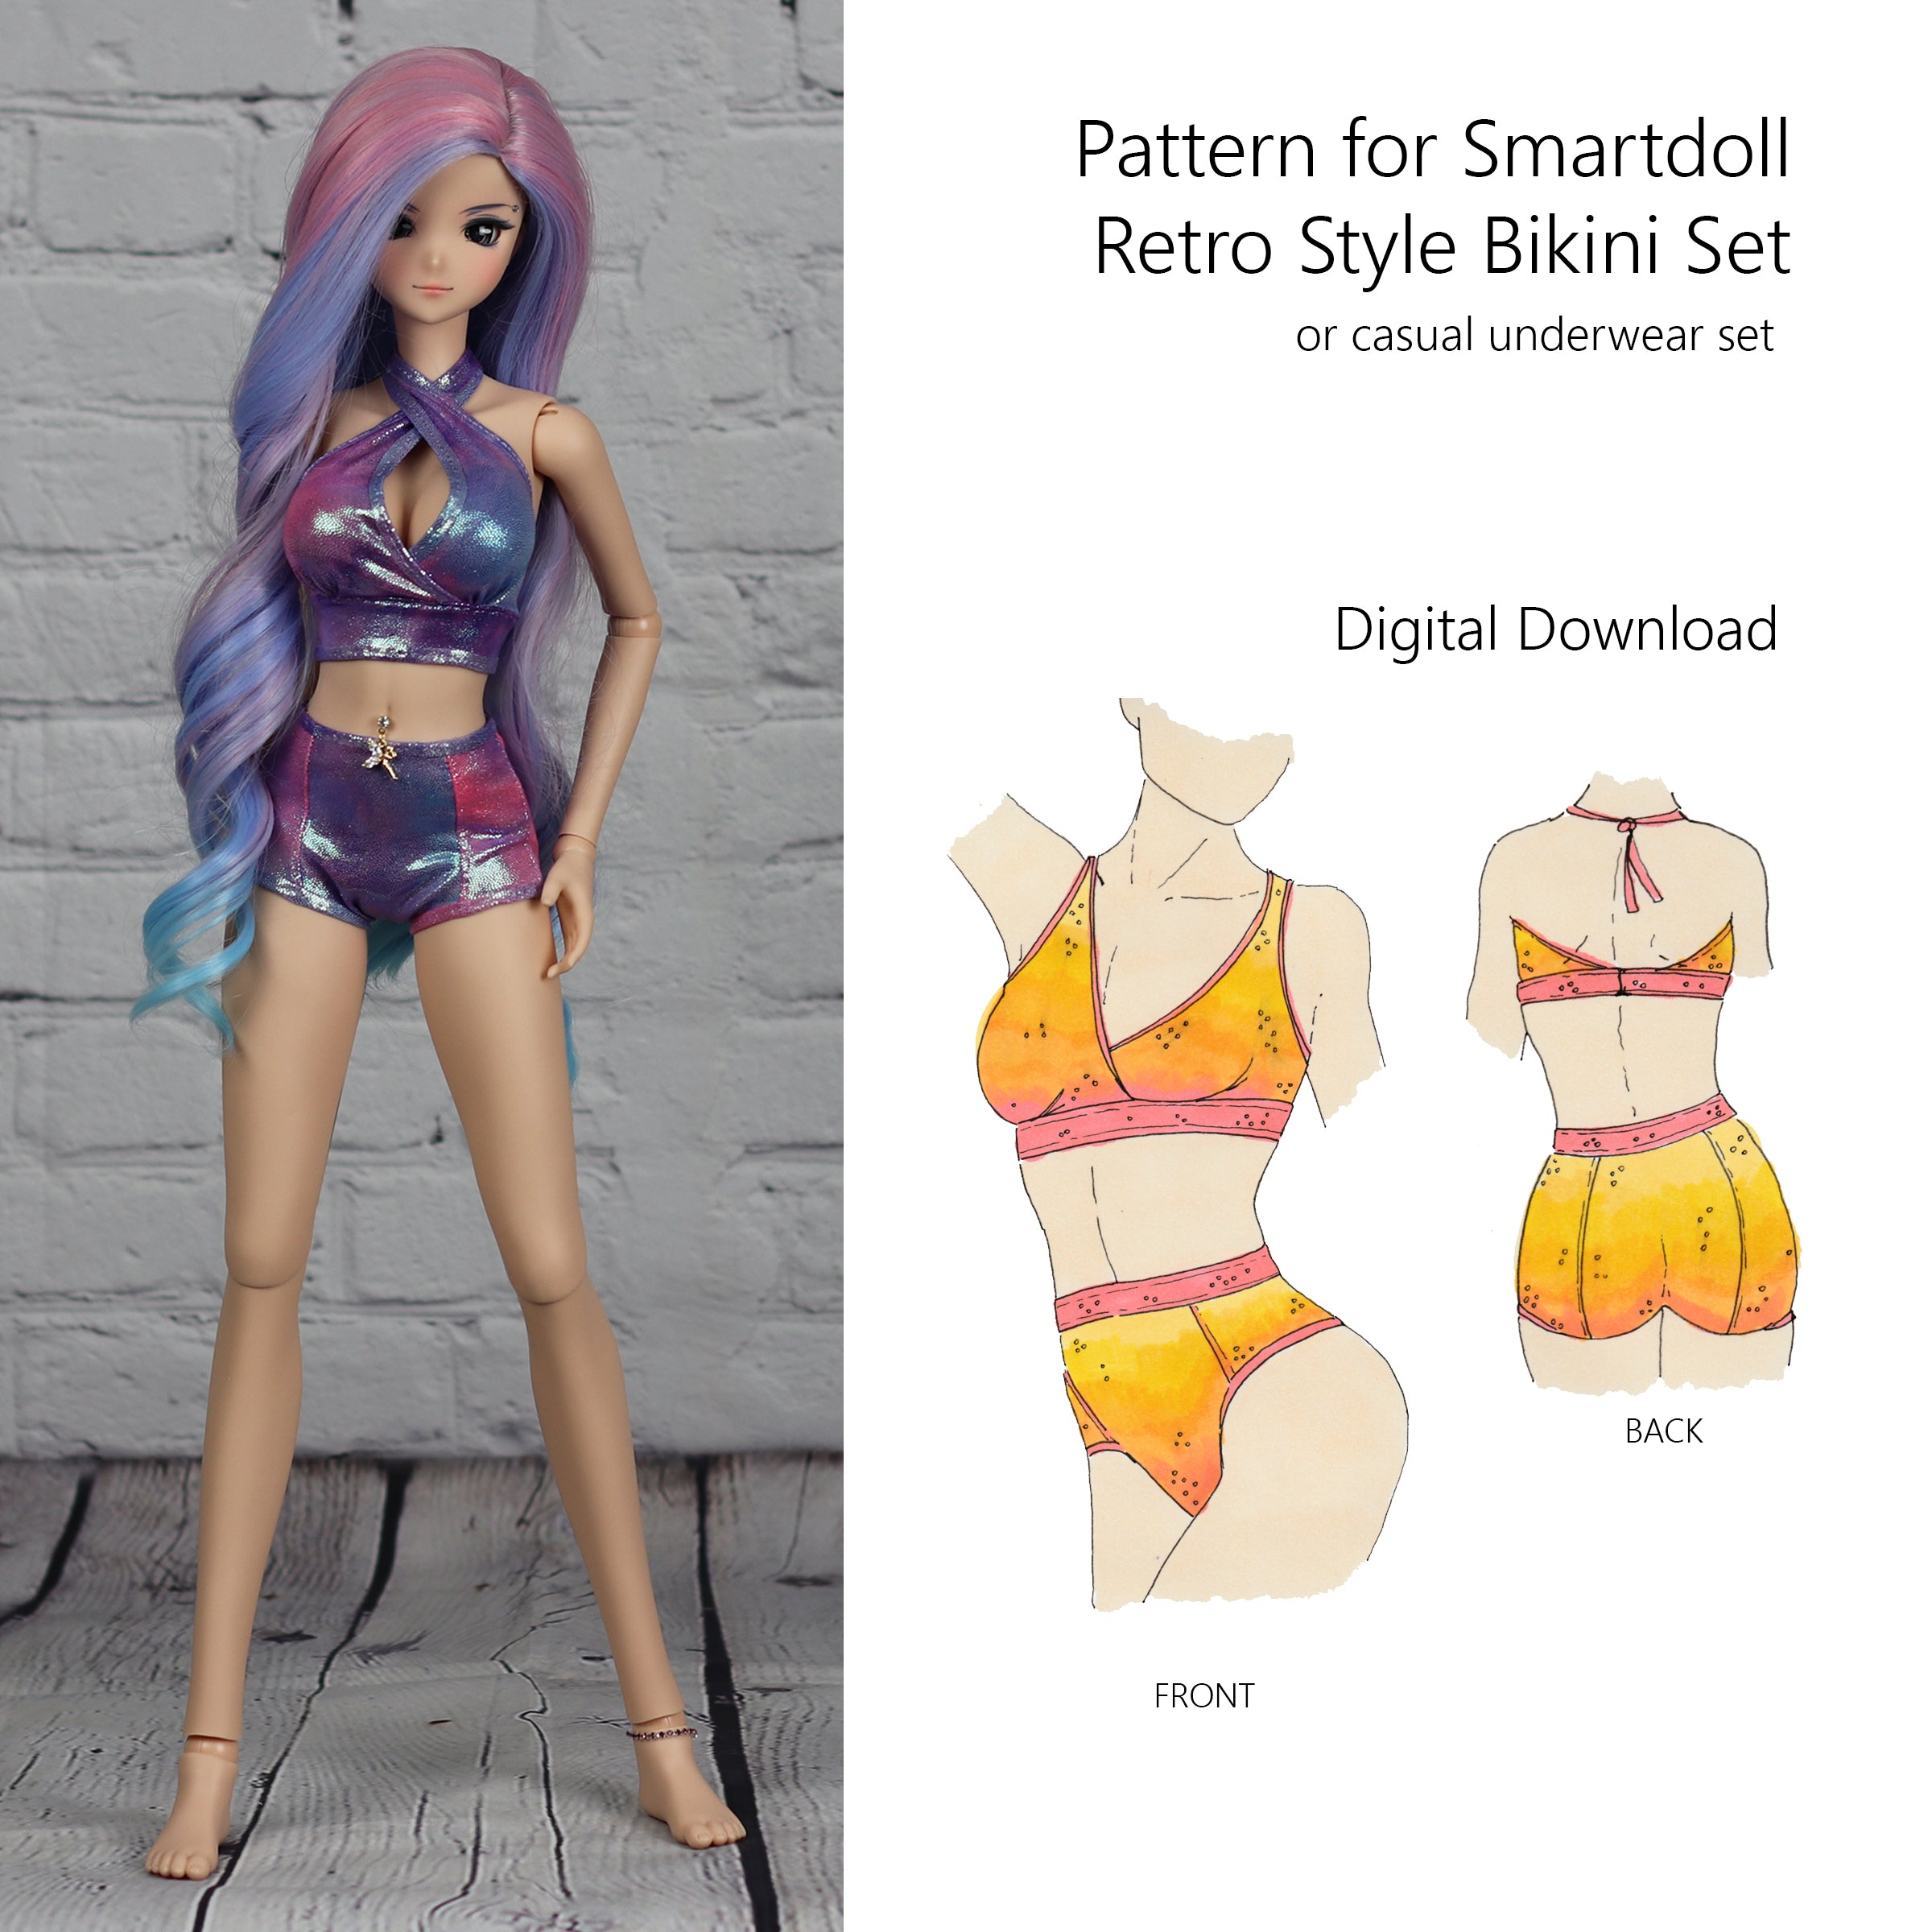 DOLL BRA and PANTIES Pattern for All Bust Sizes, Panties for Smart